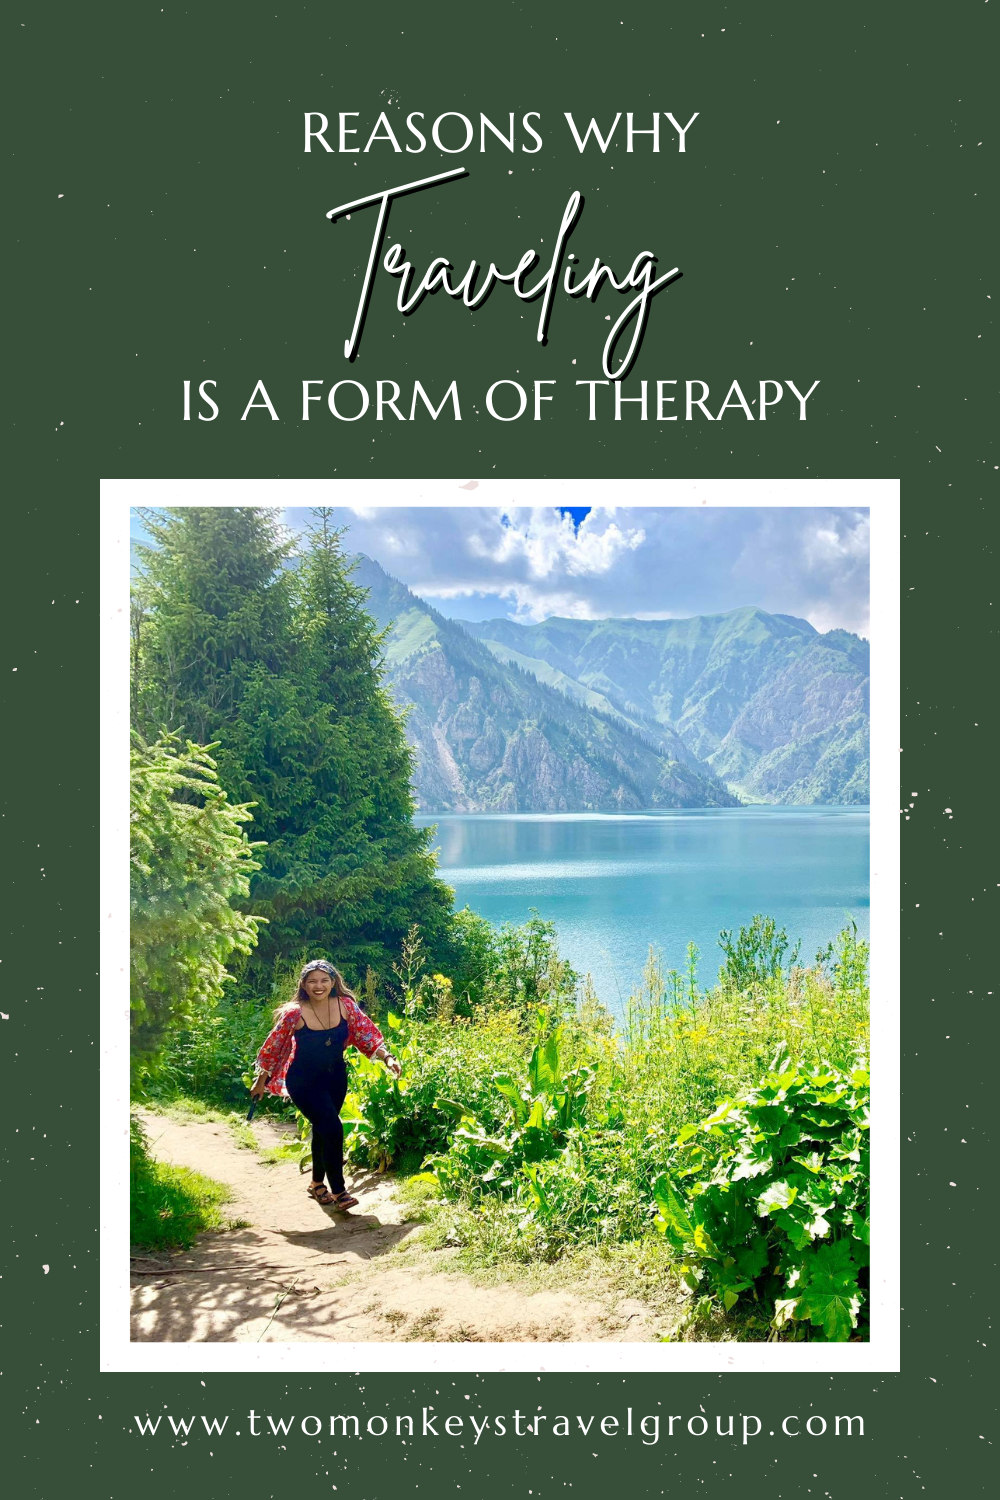 8 Reasons Why Traveling is a Form of Therapy